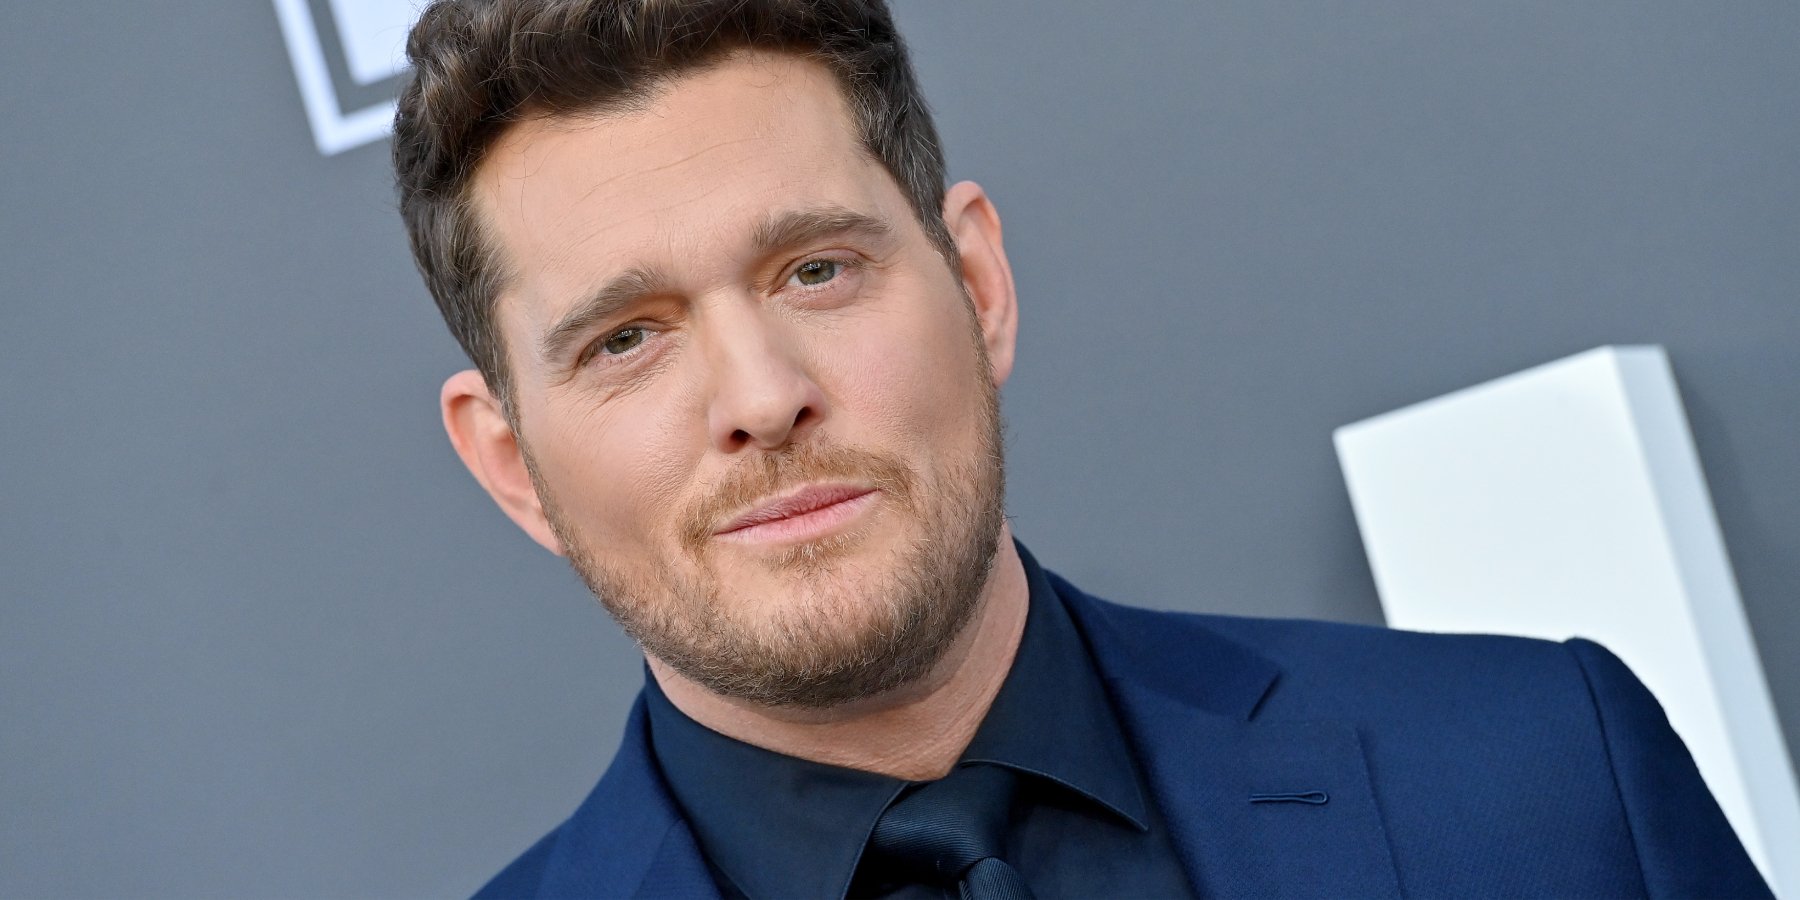 Michael Buble poses on the red carpet in 2022, he will be featured in a themed night for 'Dancing with the Stars.'